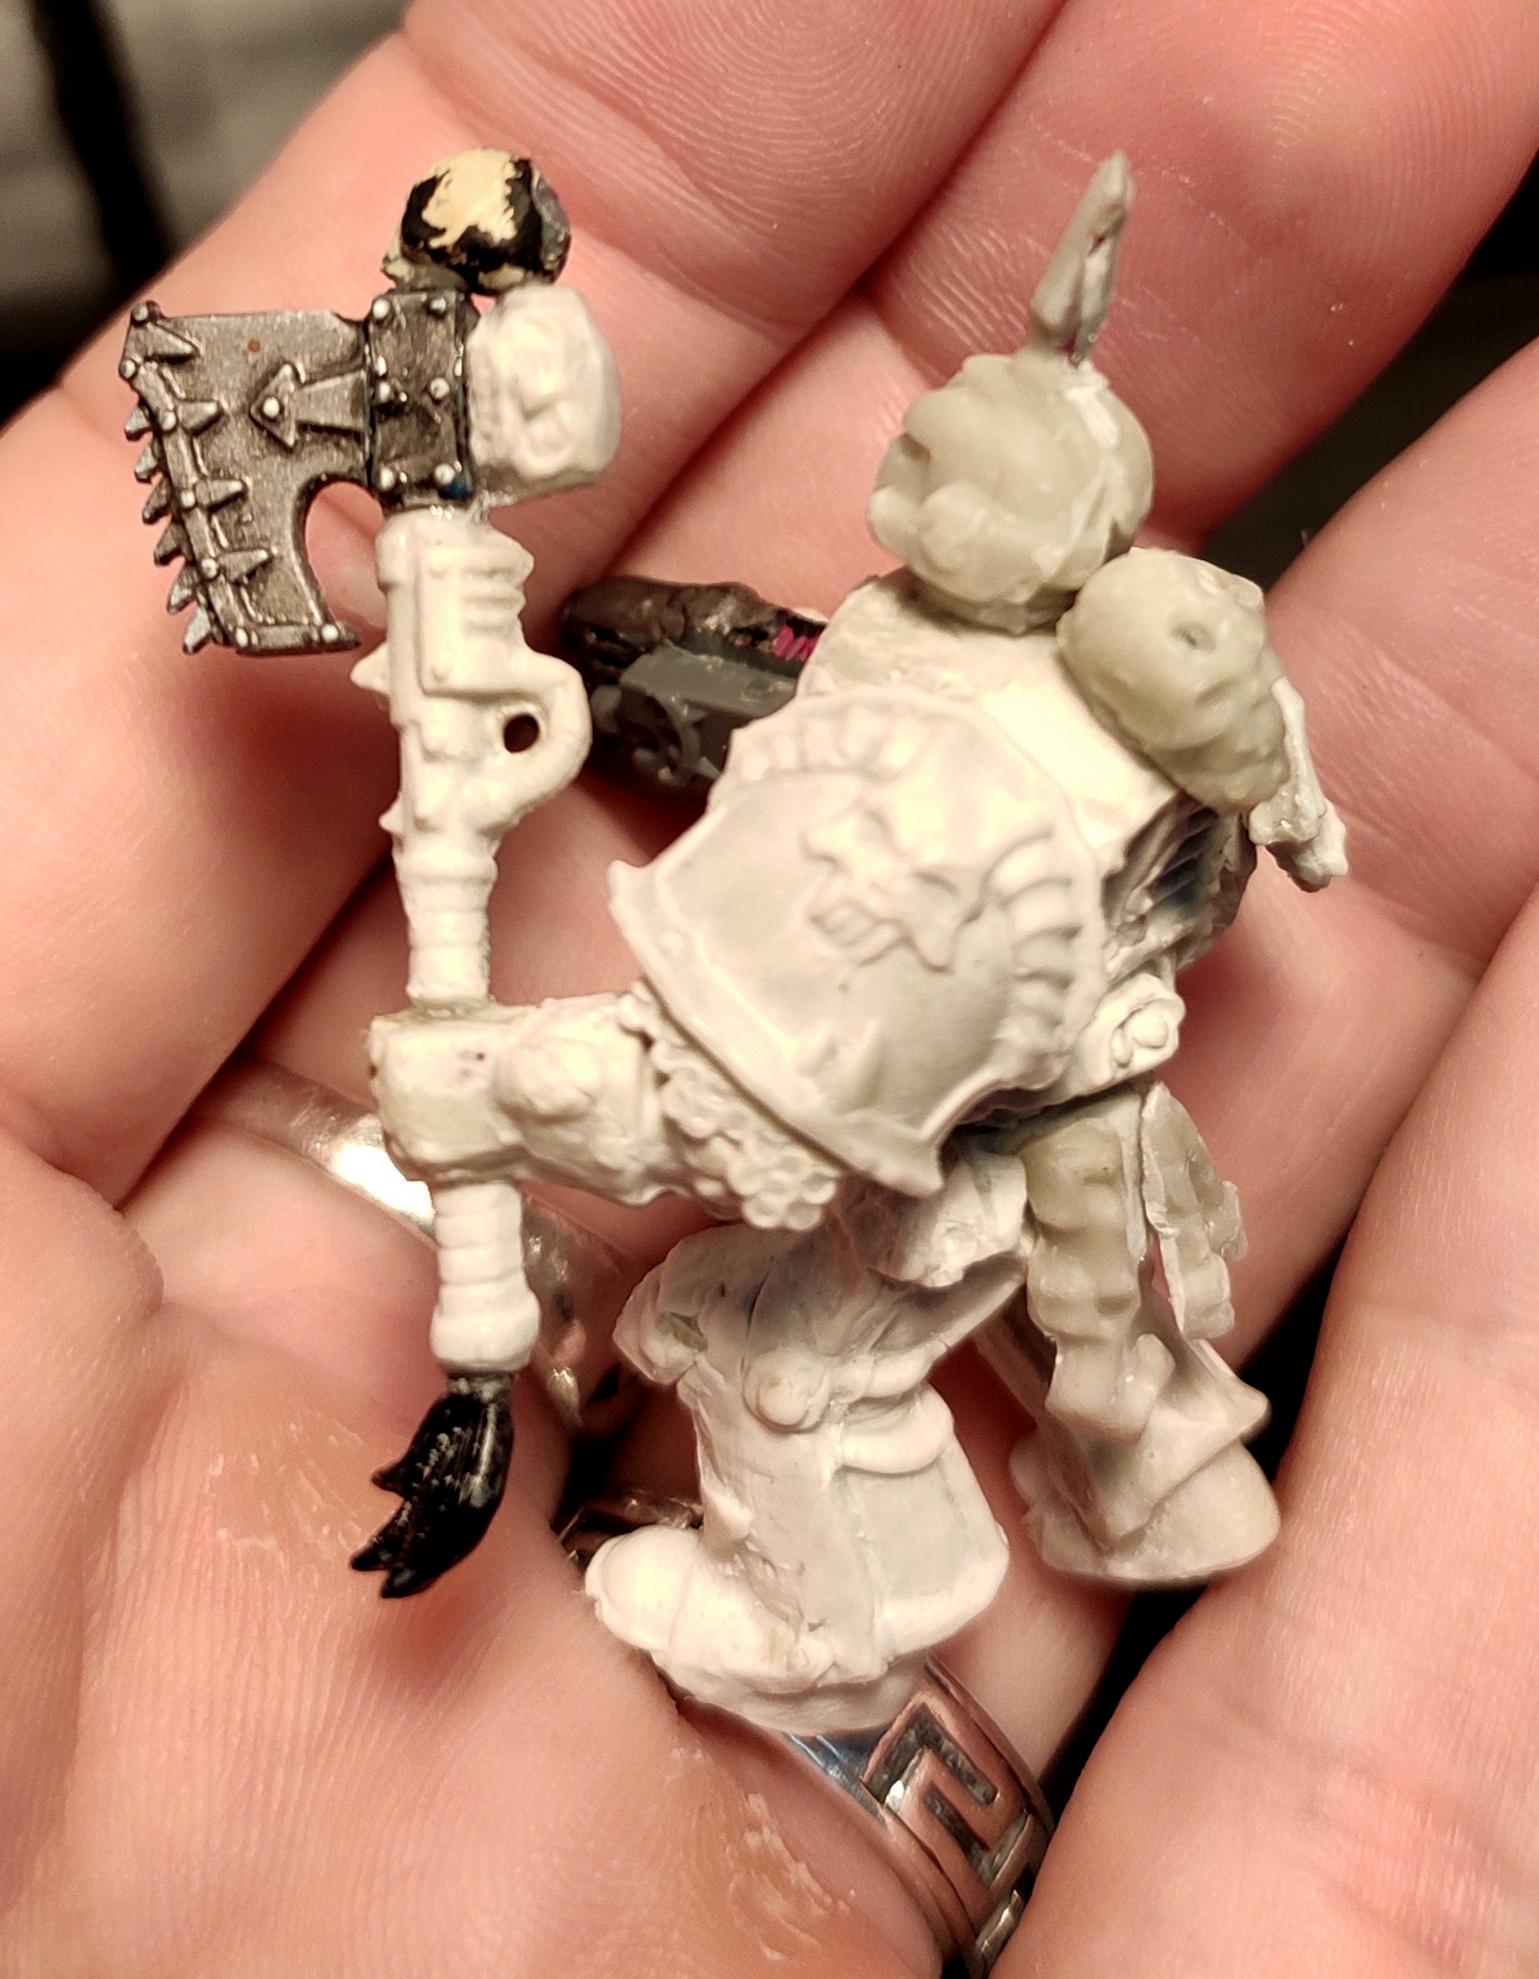 Casting, Chain Axe, Chaos, Chaos Space Marines, Combiweapon, Conversion, Heresy, Heretic Astartes, Infantry, Kitbash, Putty, Terminator Armor, Traitor Legions, Warhammer 40,000, Work In Progress